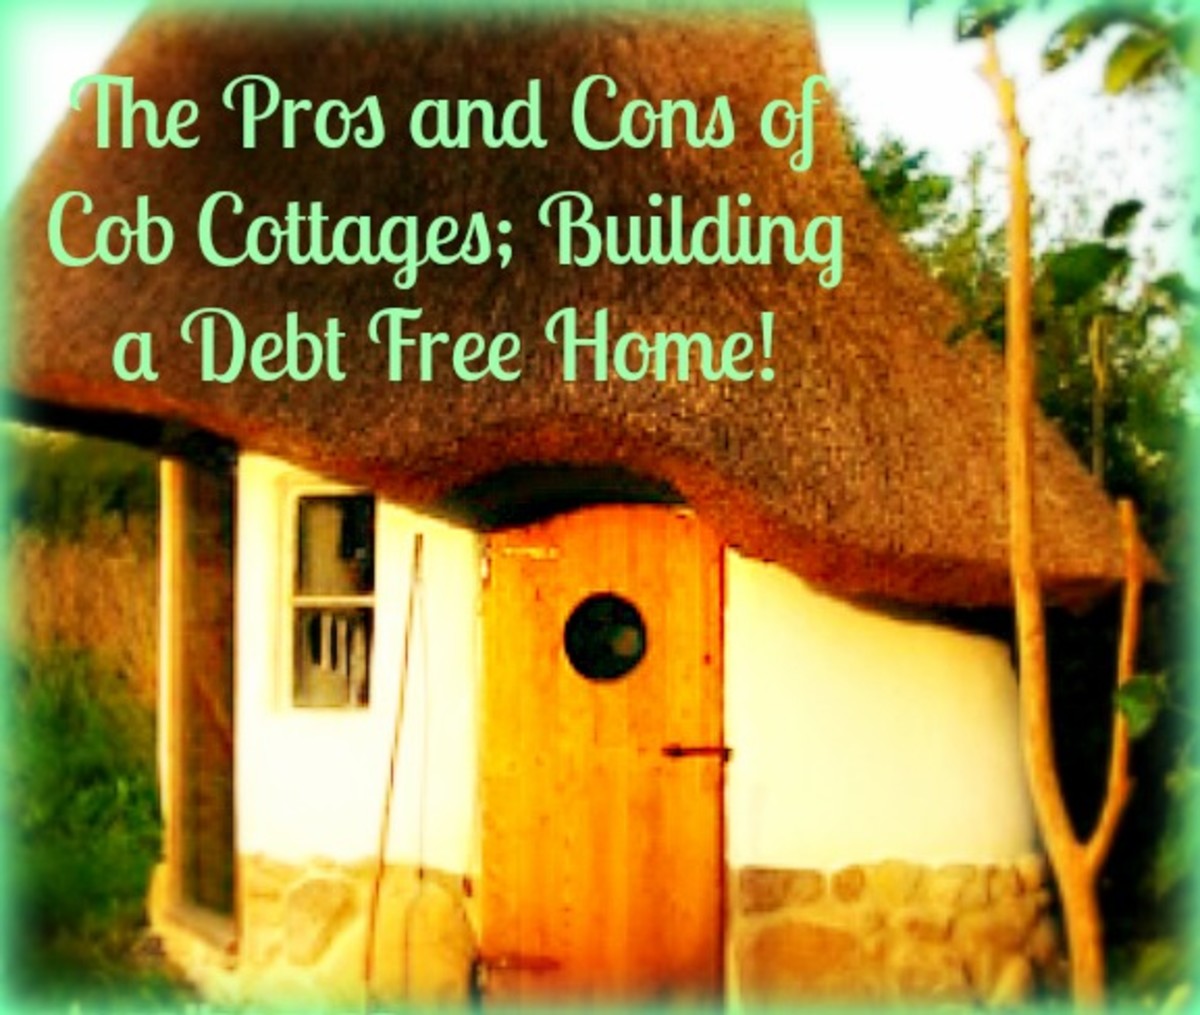 The Pros and Cons of Cob Cottages; Building a Debt Free Home!